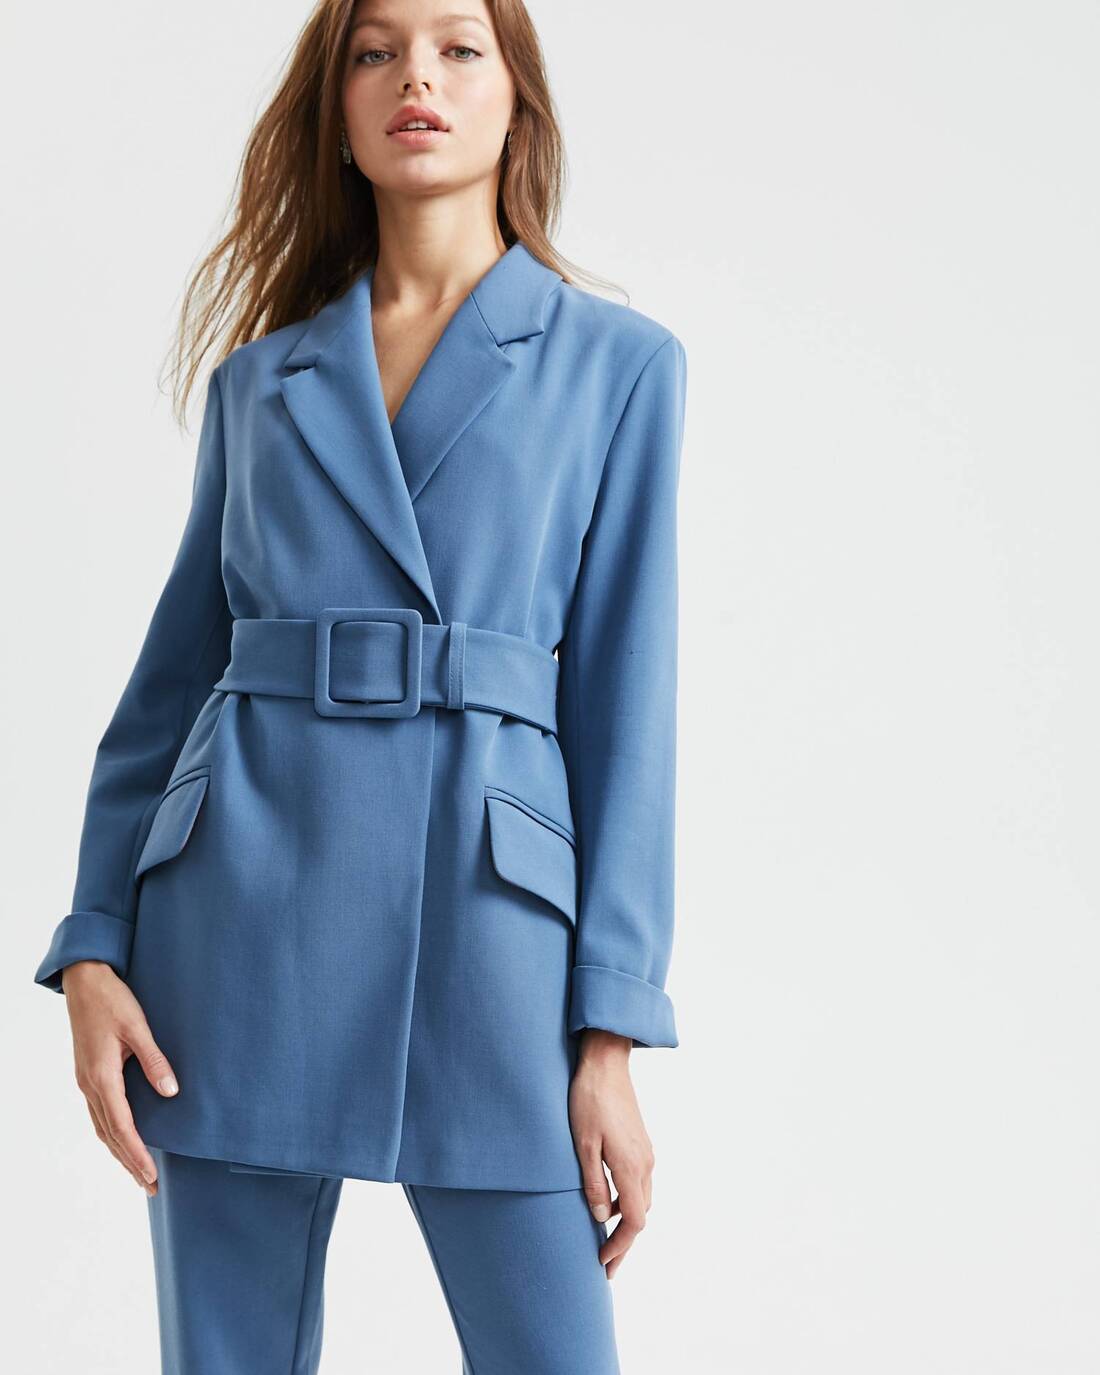 Belted two-piece suit